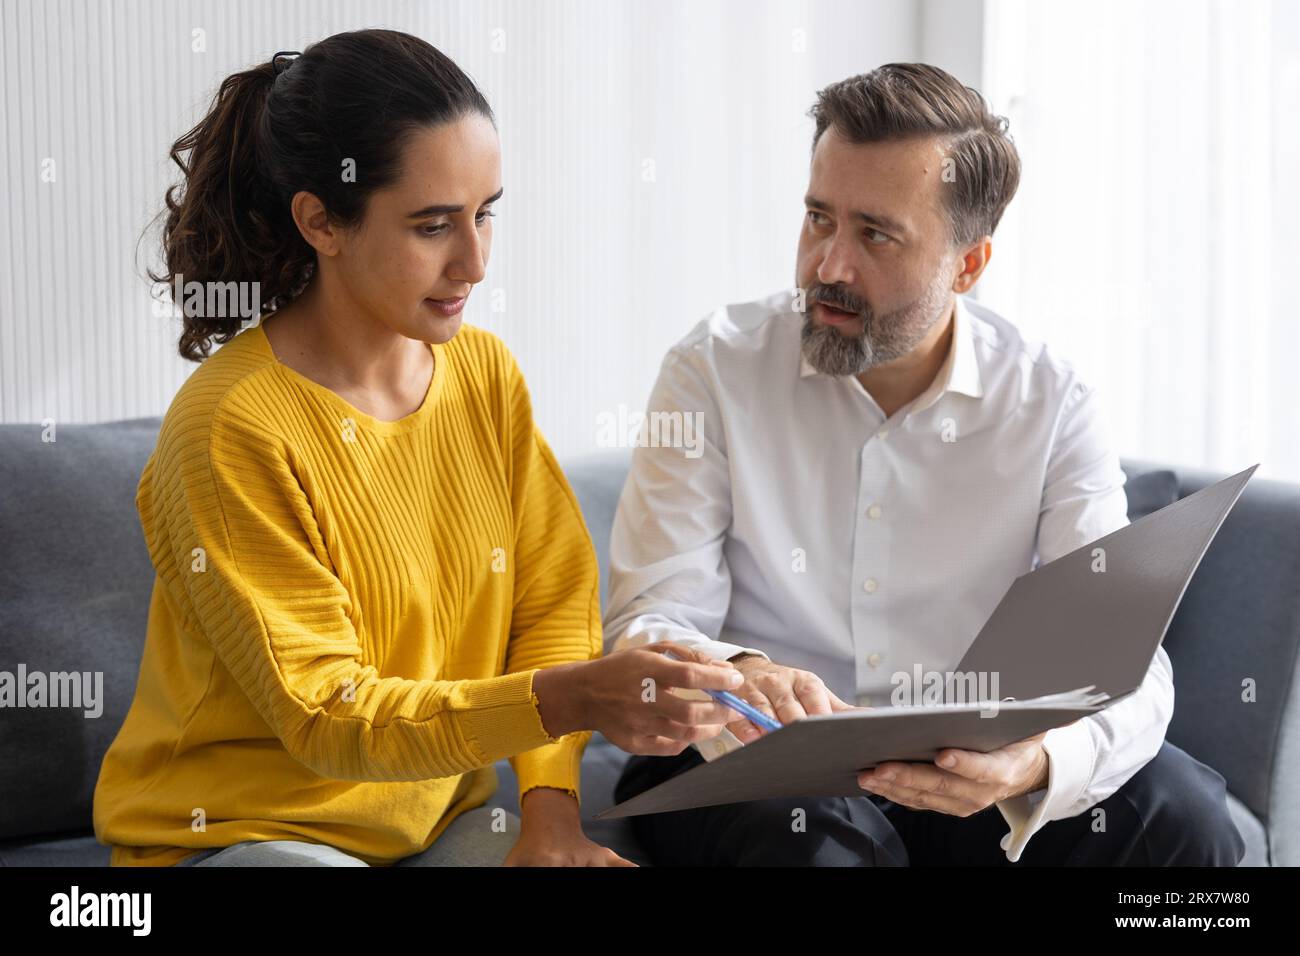 Senior professional business agent or financial lawyer tax advisor talking with indian woman about insurance contract document Stock Photo